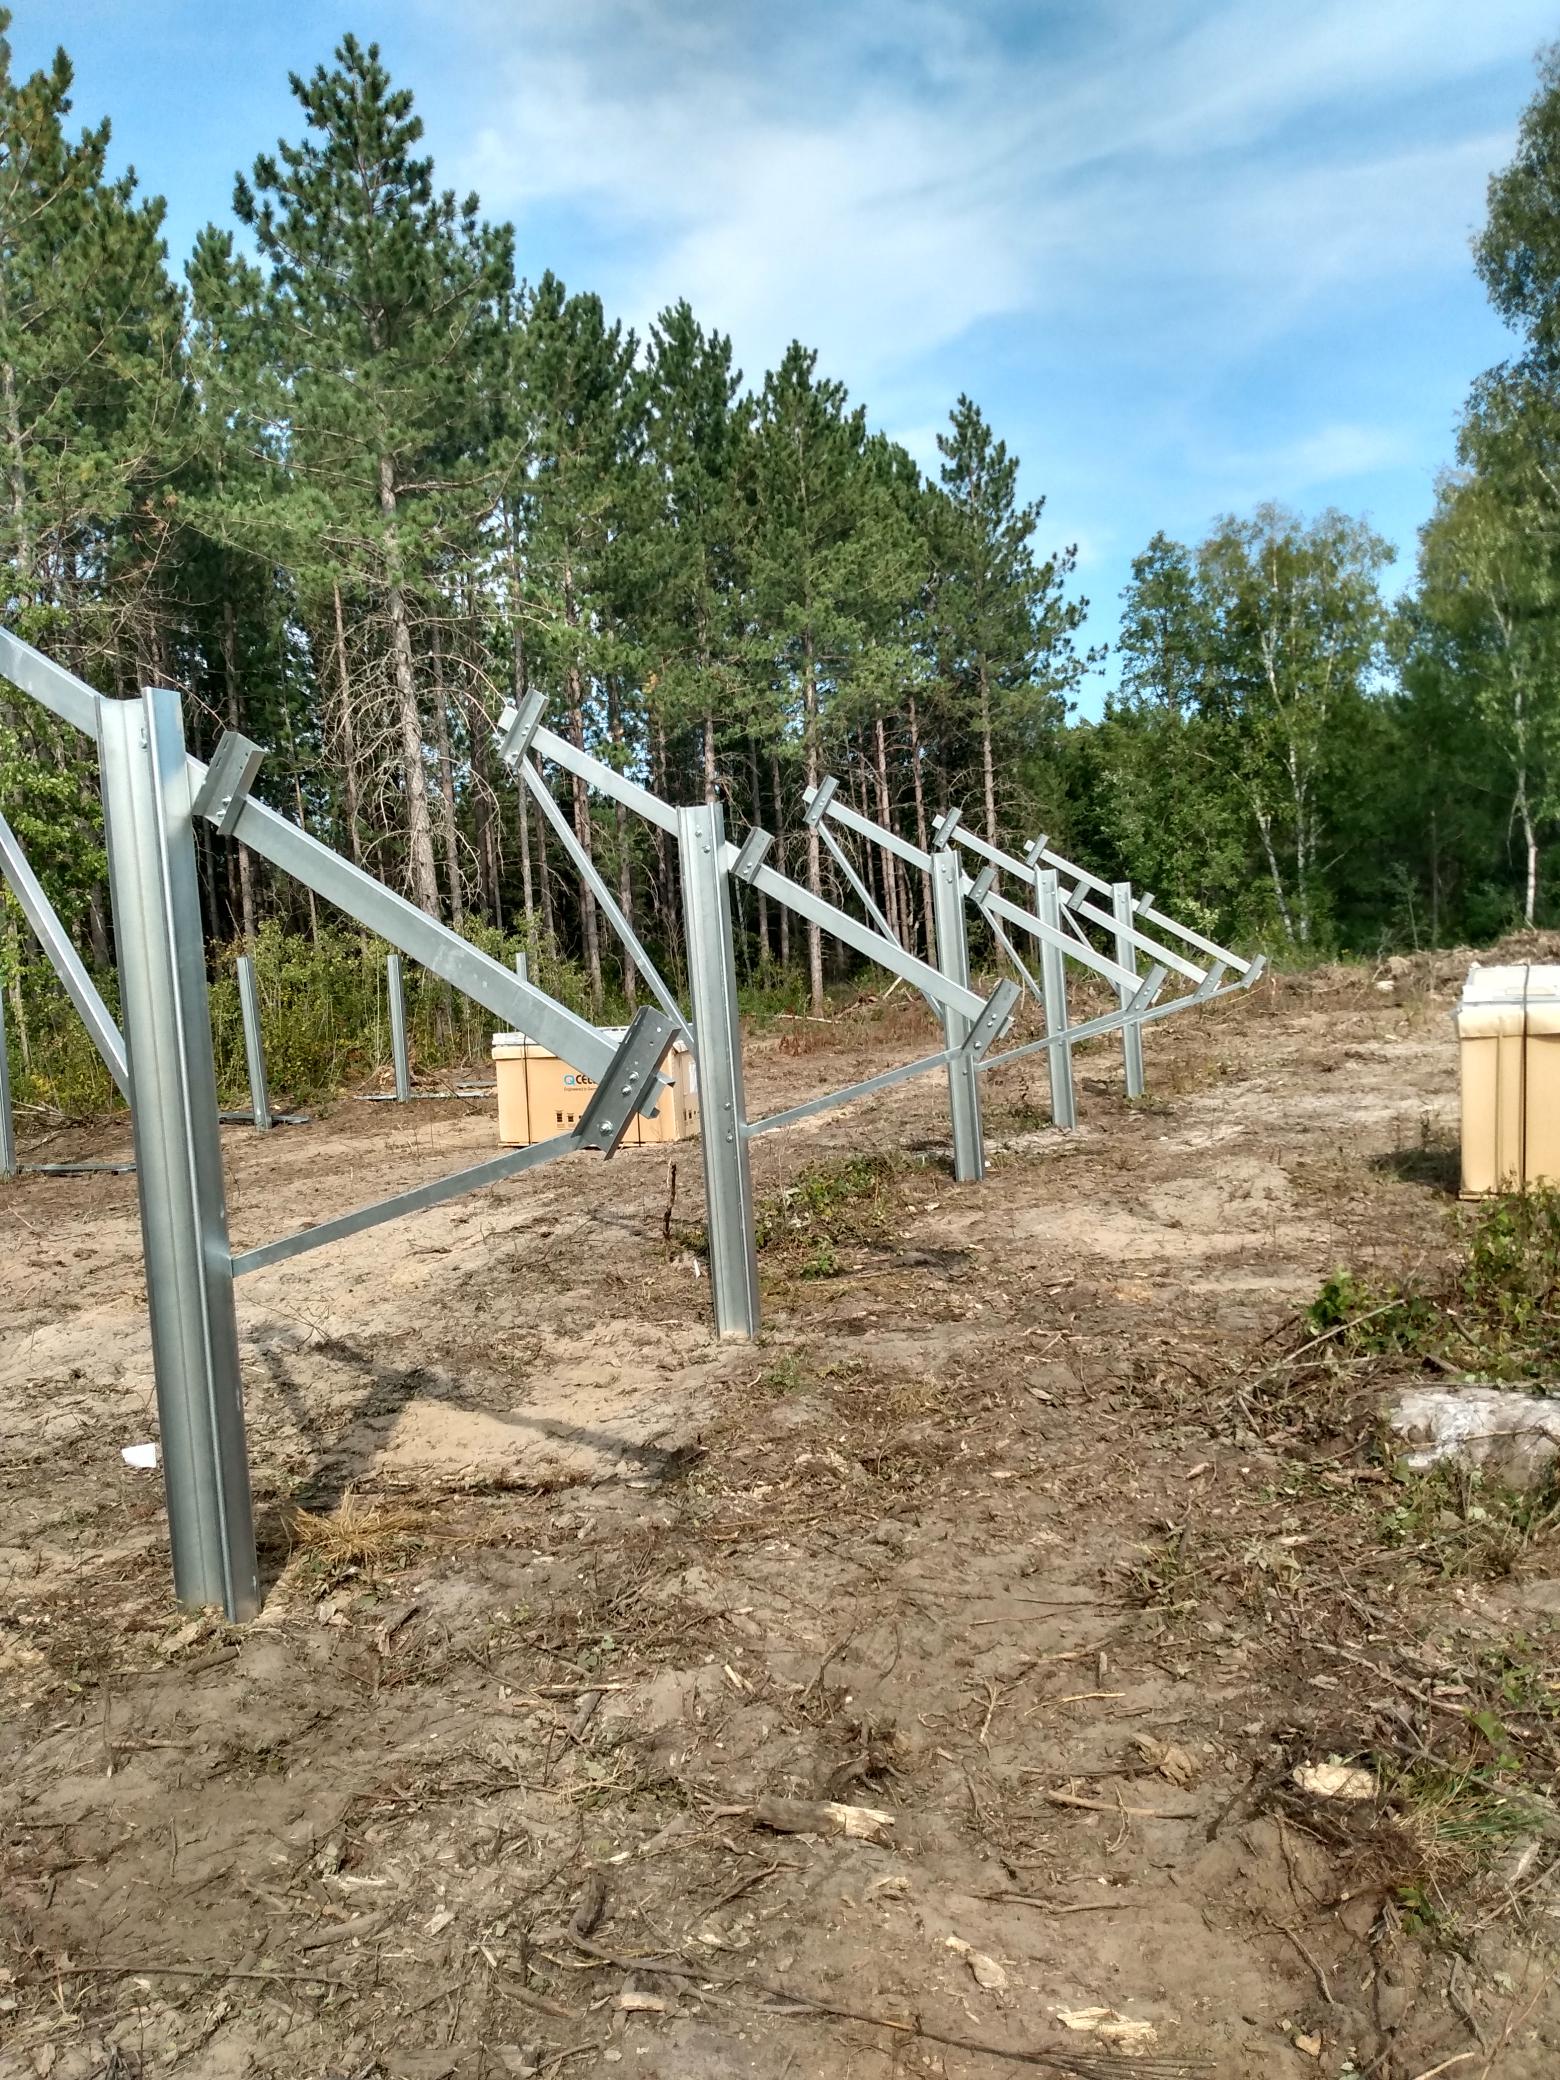 Mountings for solar panels in the woods